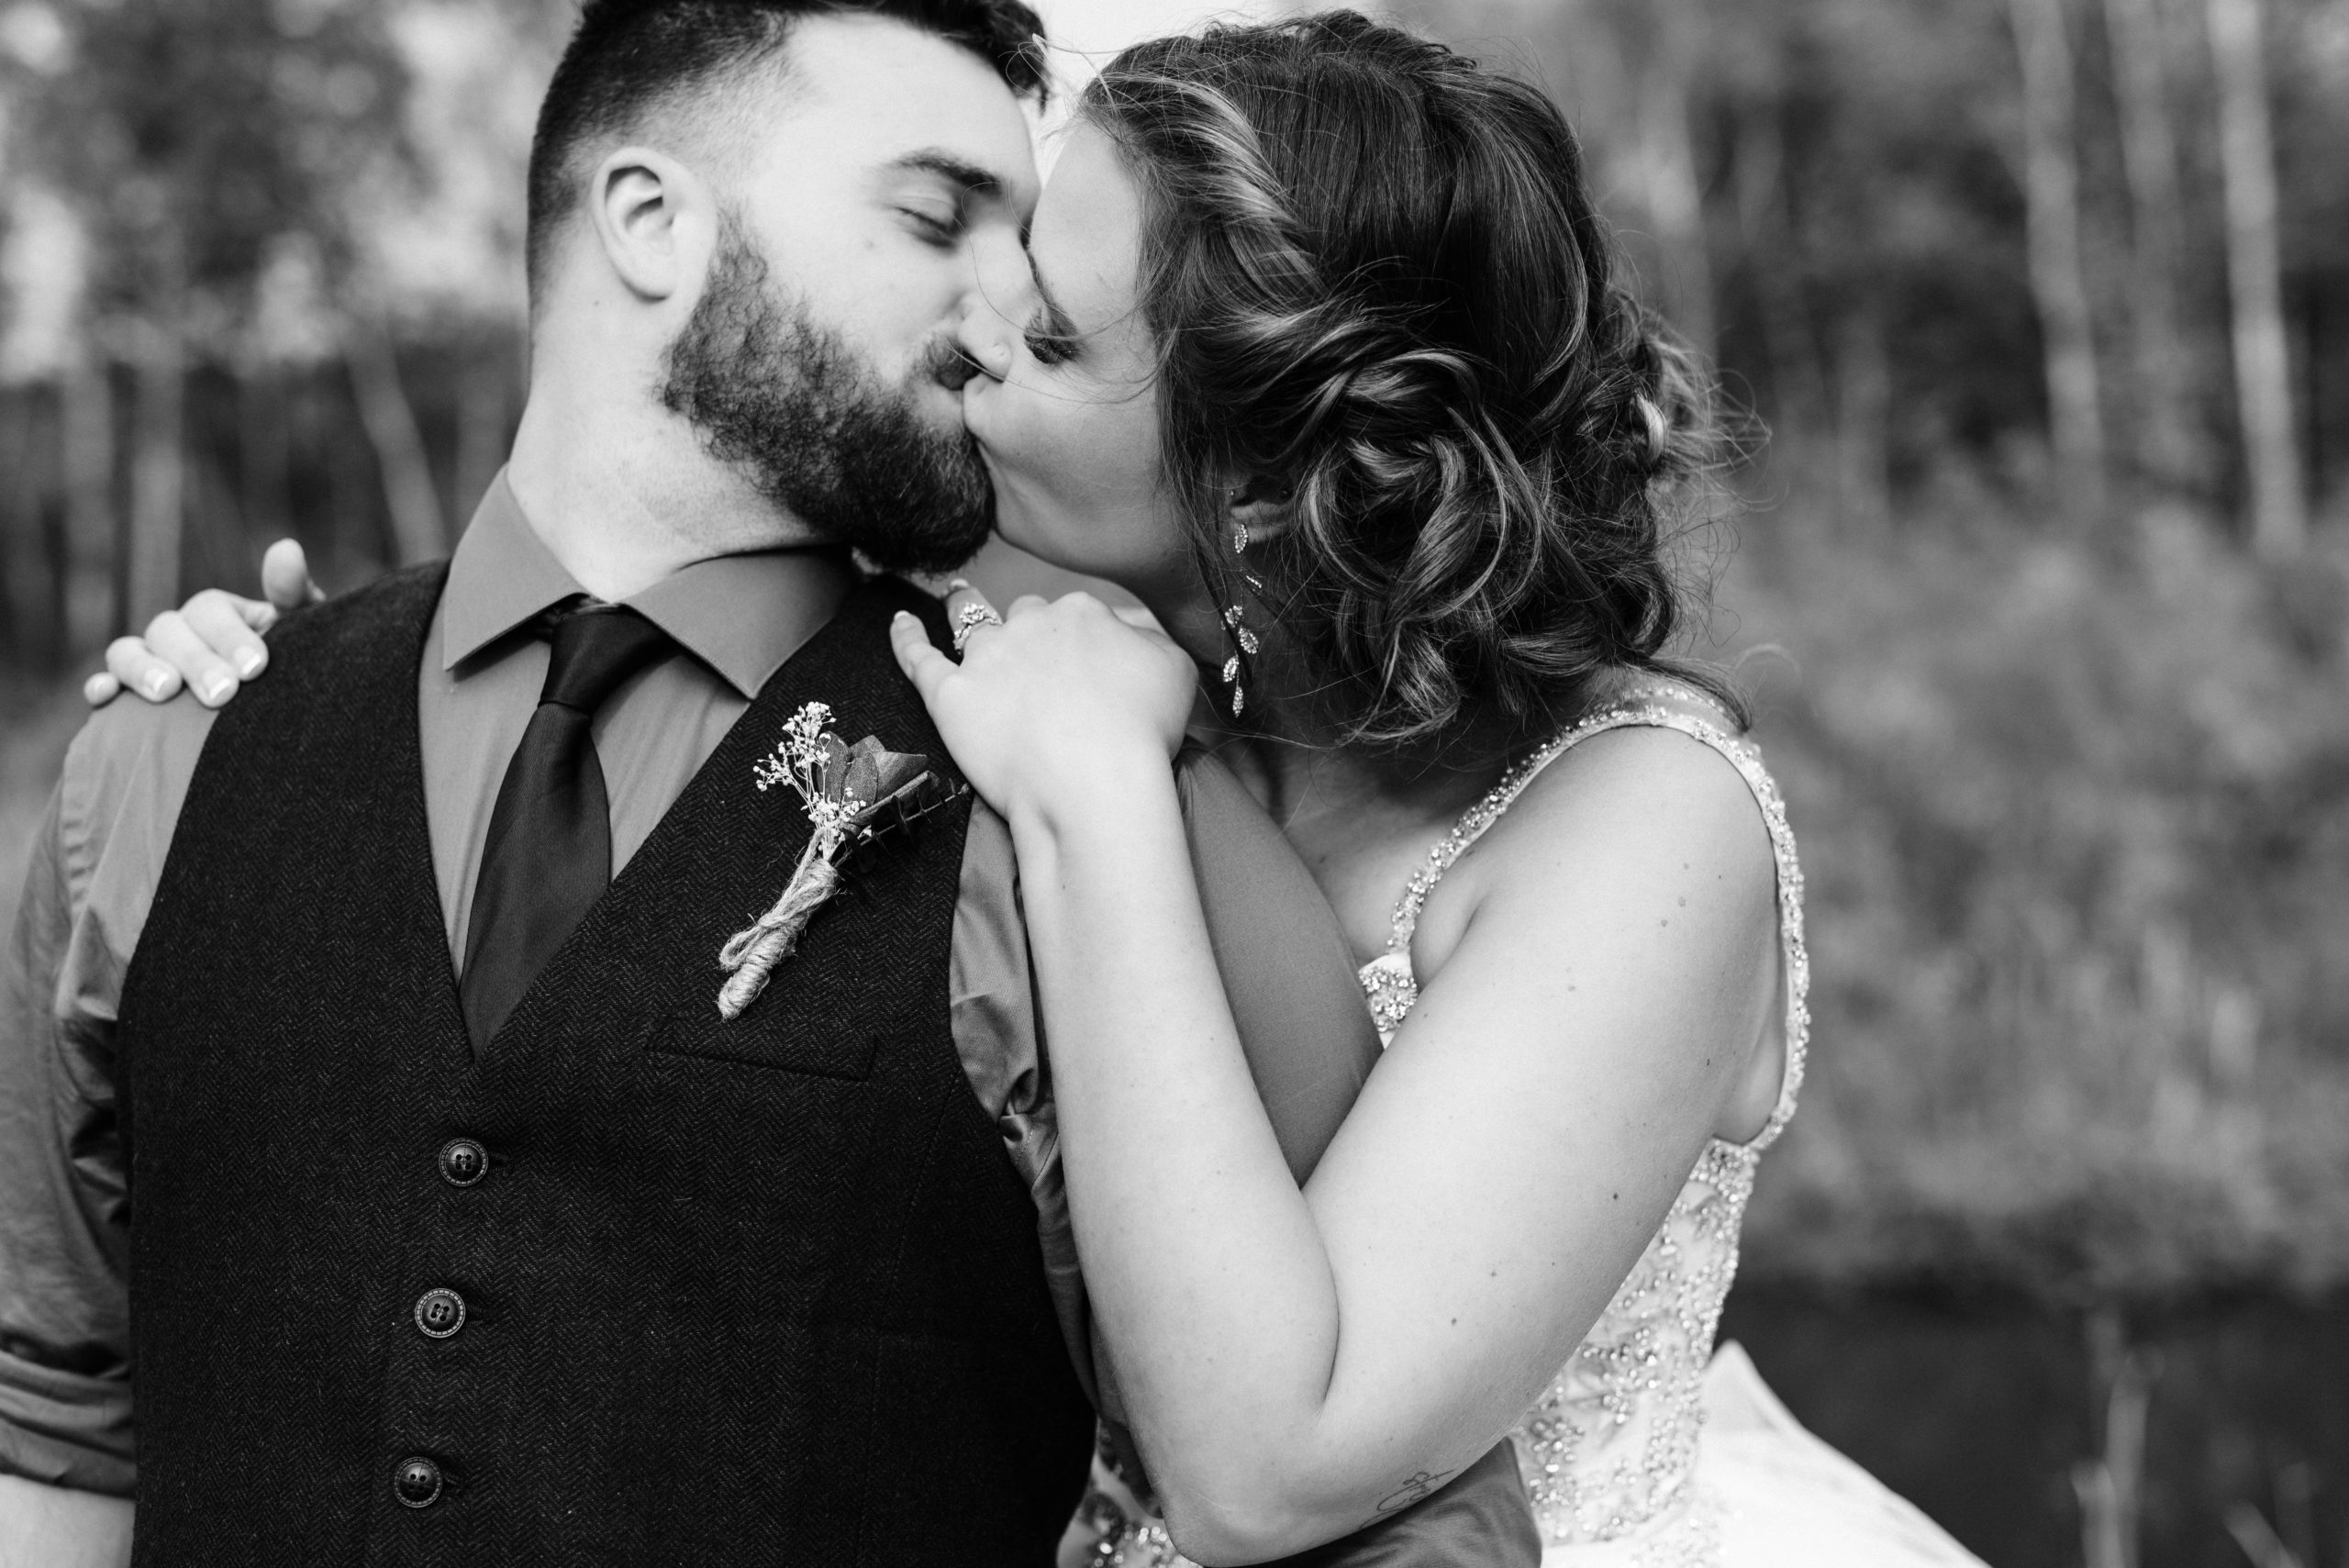 Wedding couple kissing each other on wedding day.